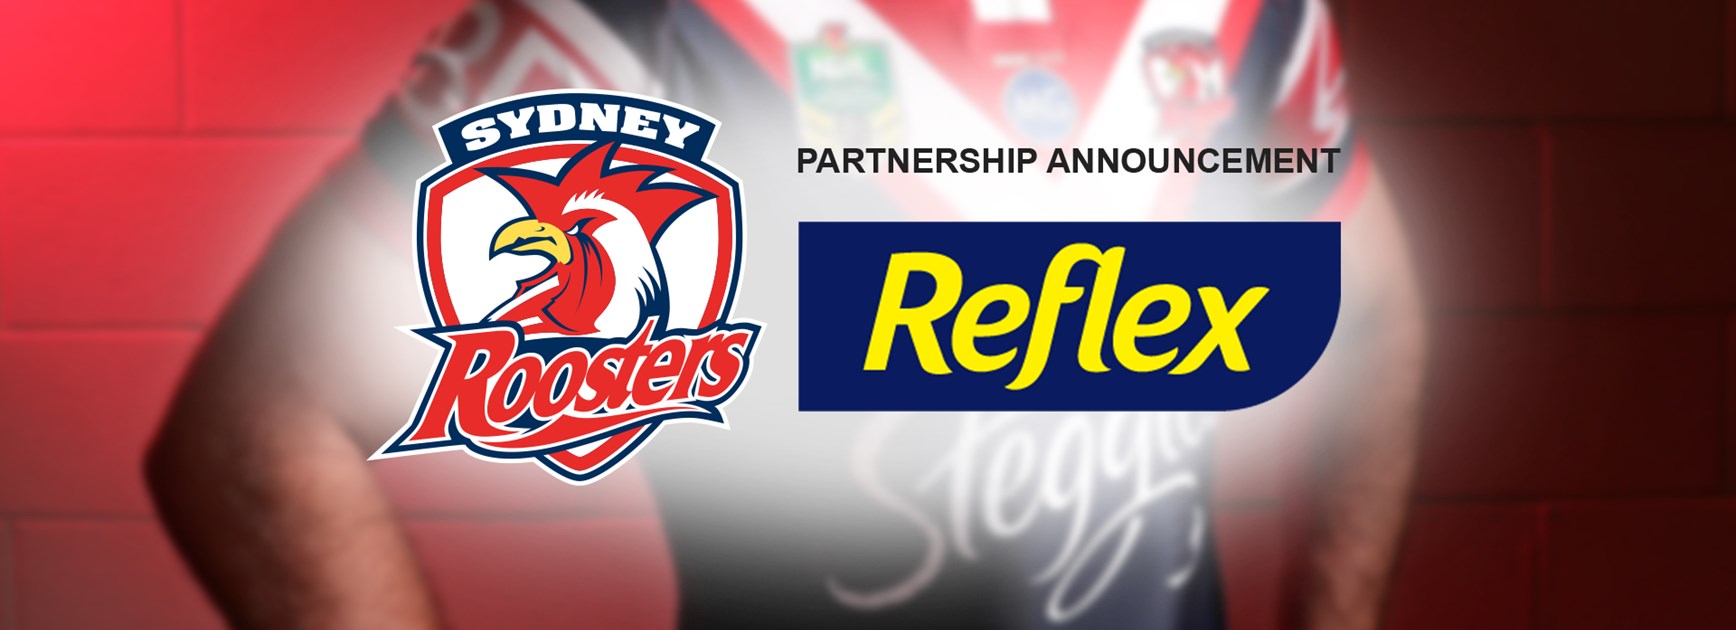 Reflex Extend Partnership With Sydney Roosters